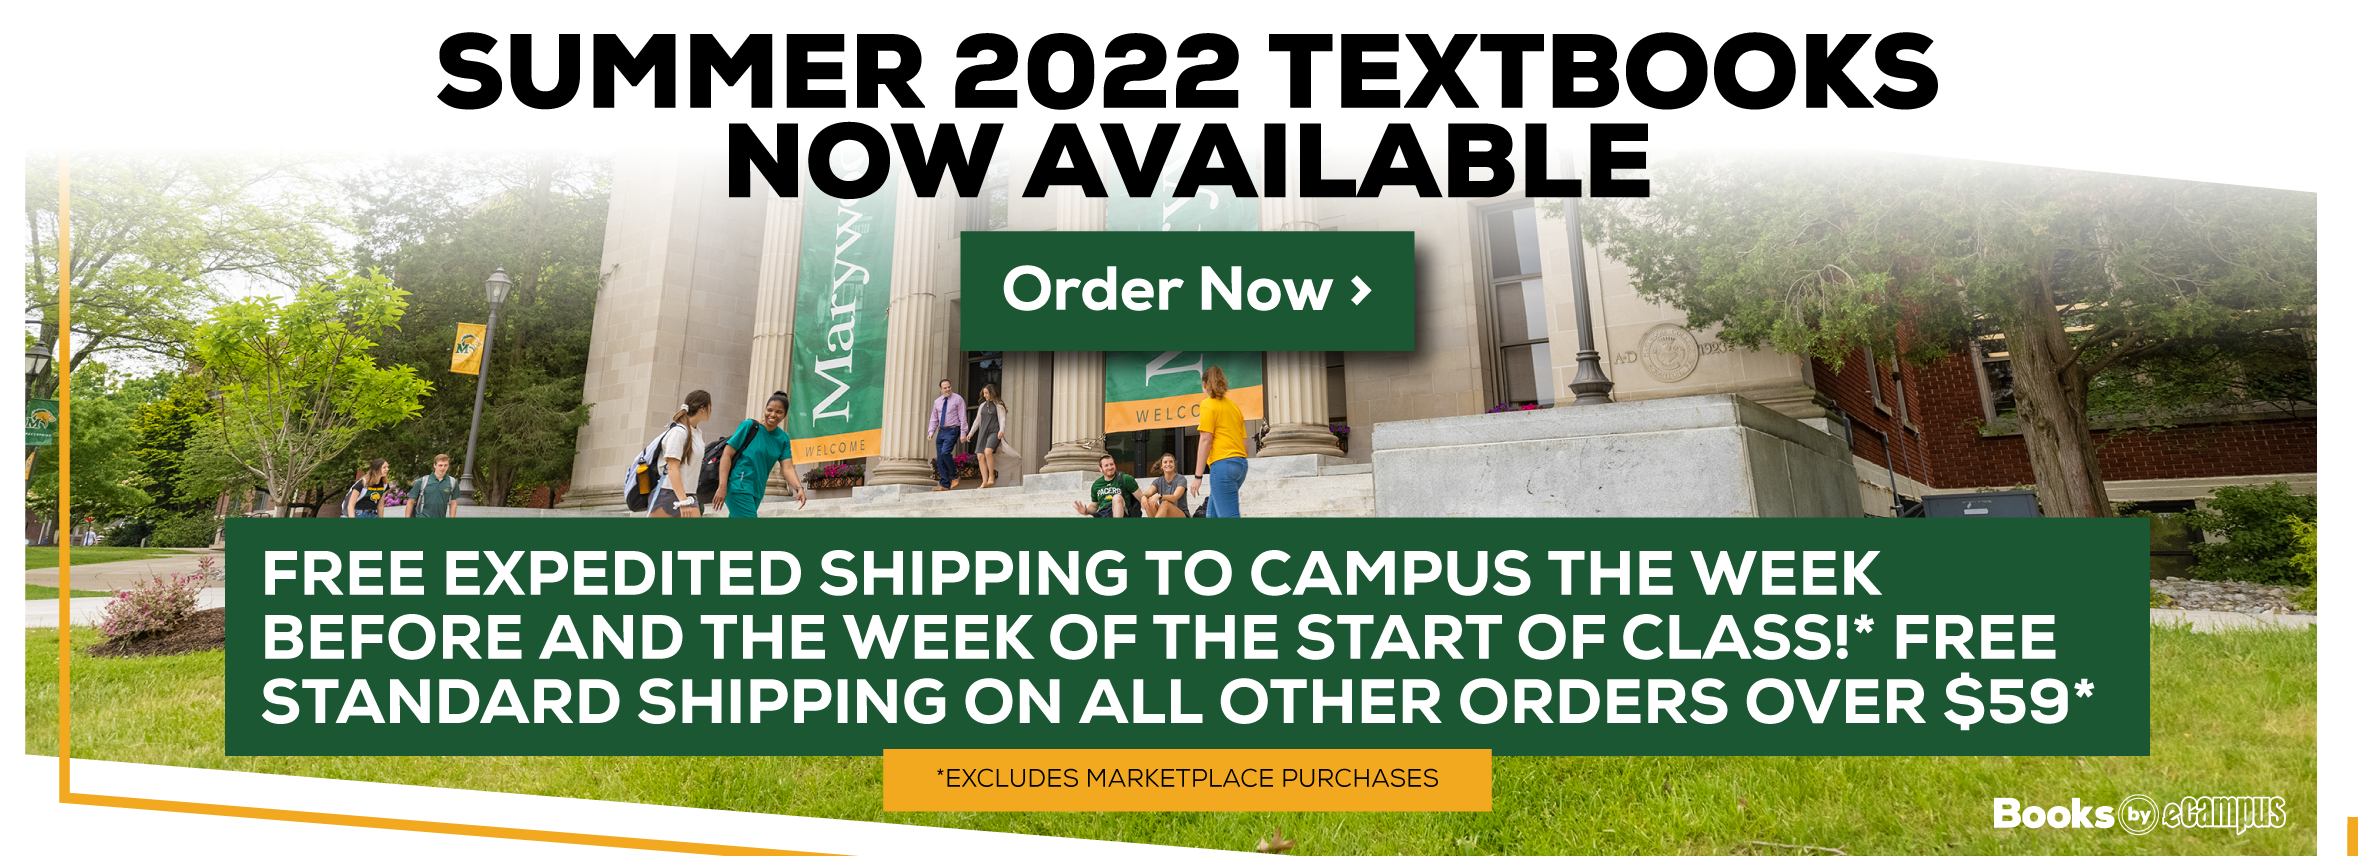 Summer 2022 Textbooks Now Available. Order Now. FREE expedited shipping to campus the week before and the week of the start of class!* FREE standard shipping on all other orders over $59* *Excludes marketplace purchases